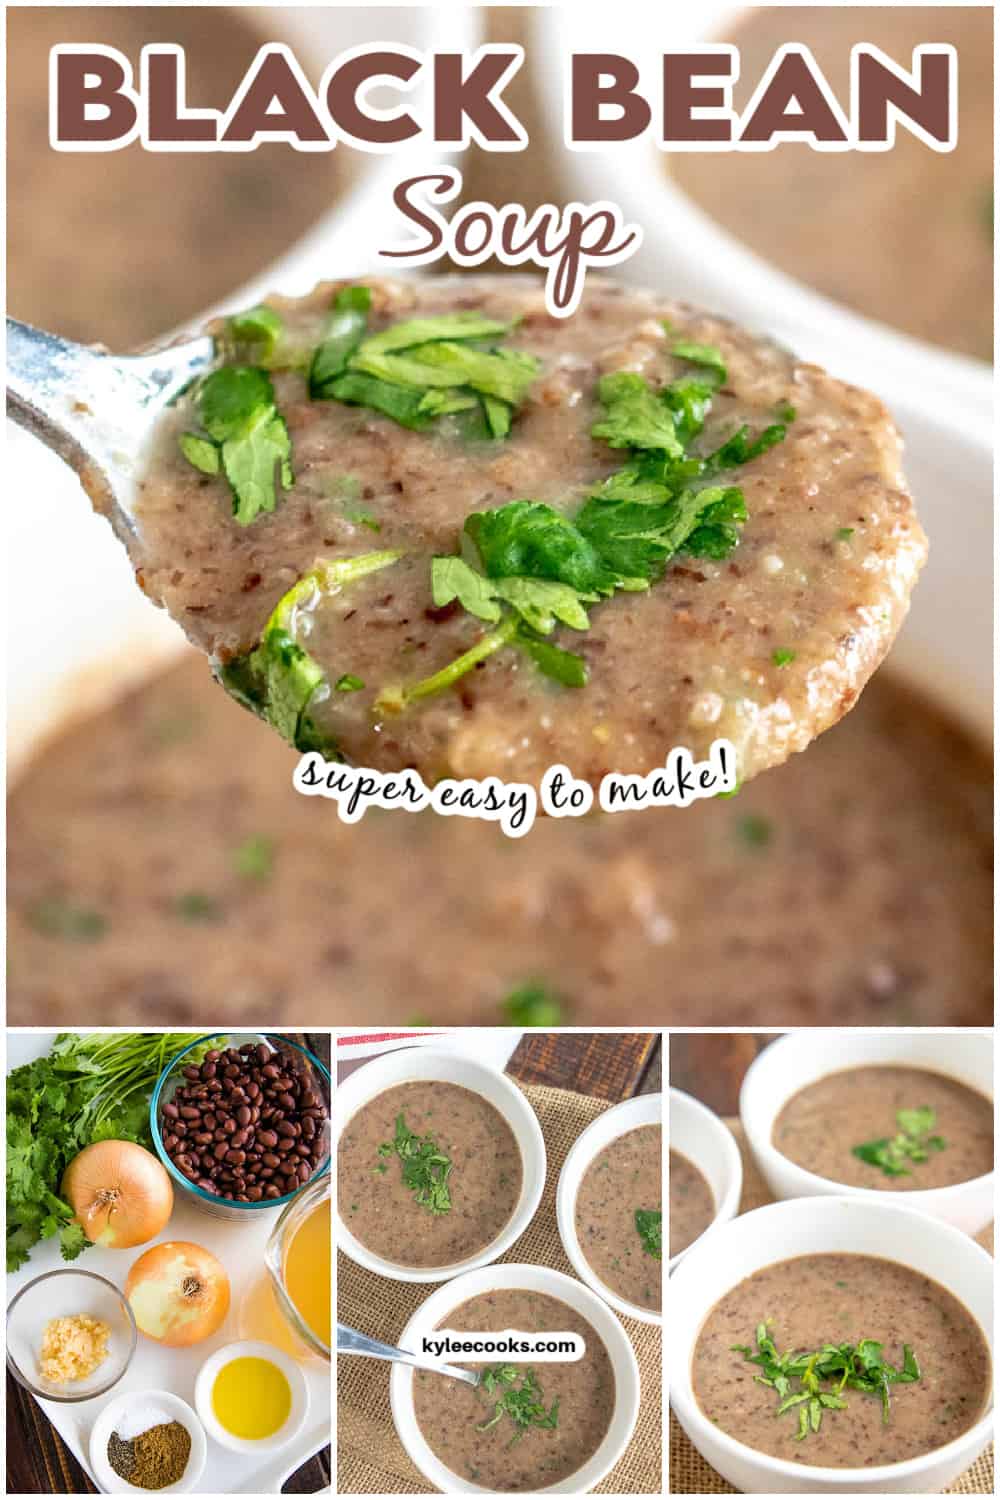 black bean soup in a white bowl with recipe ingredients and name overlaid in text.